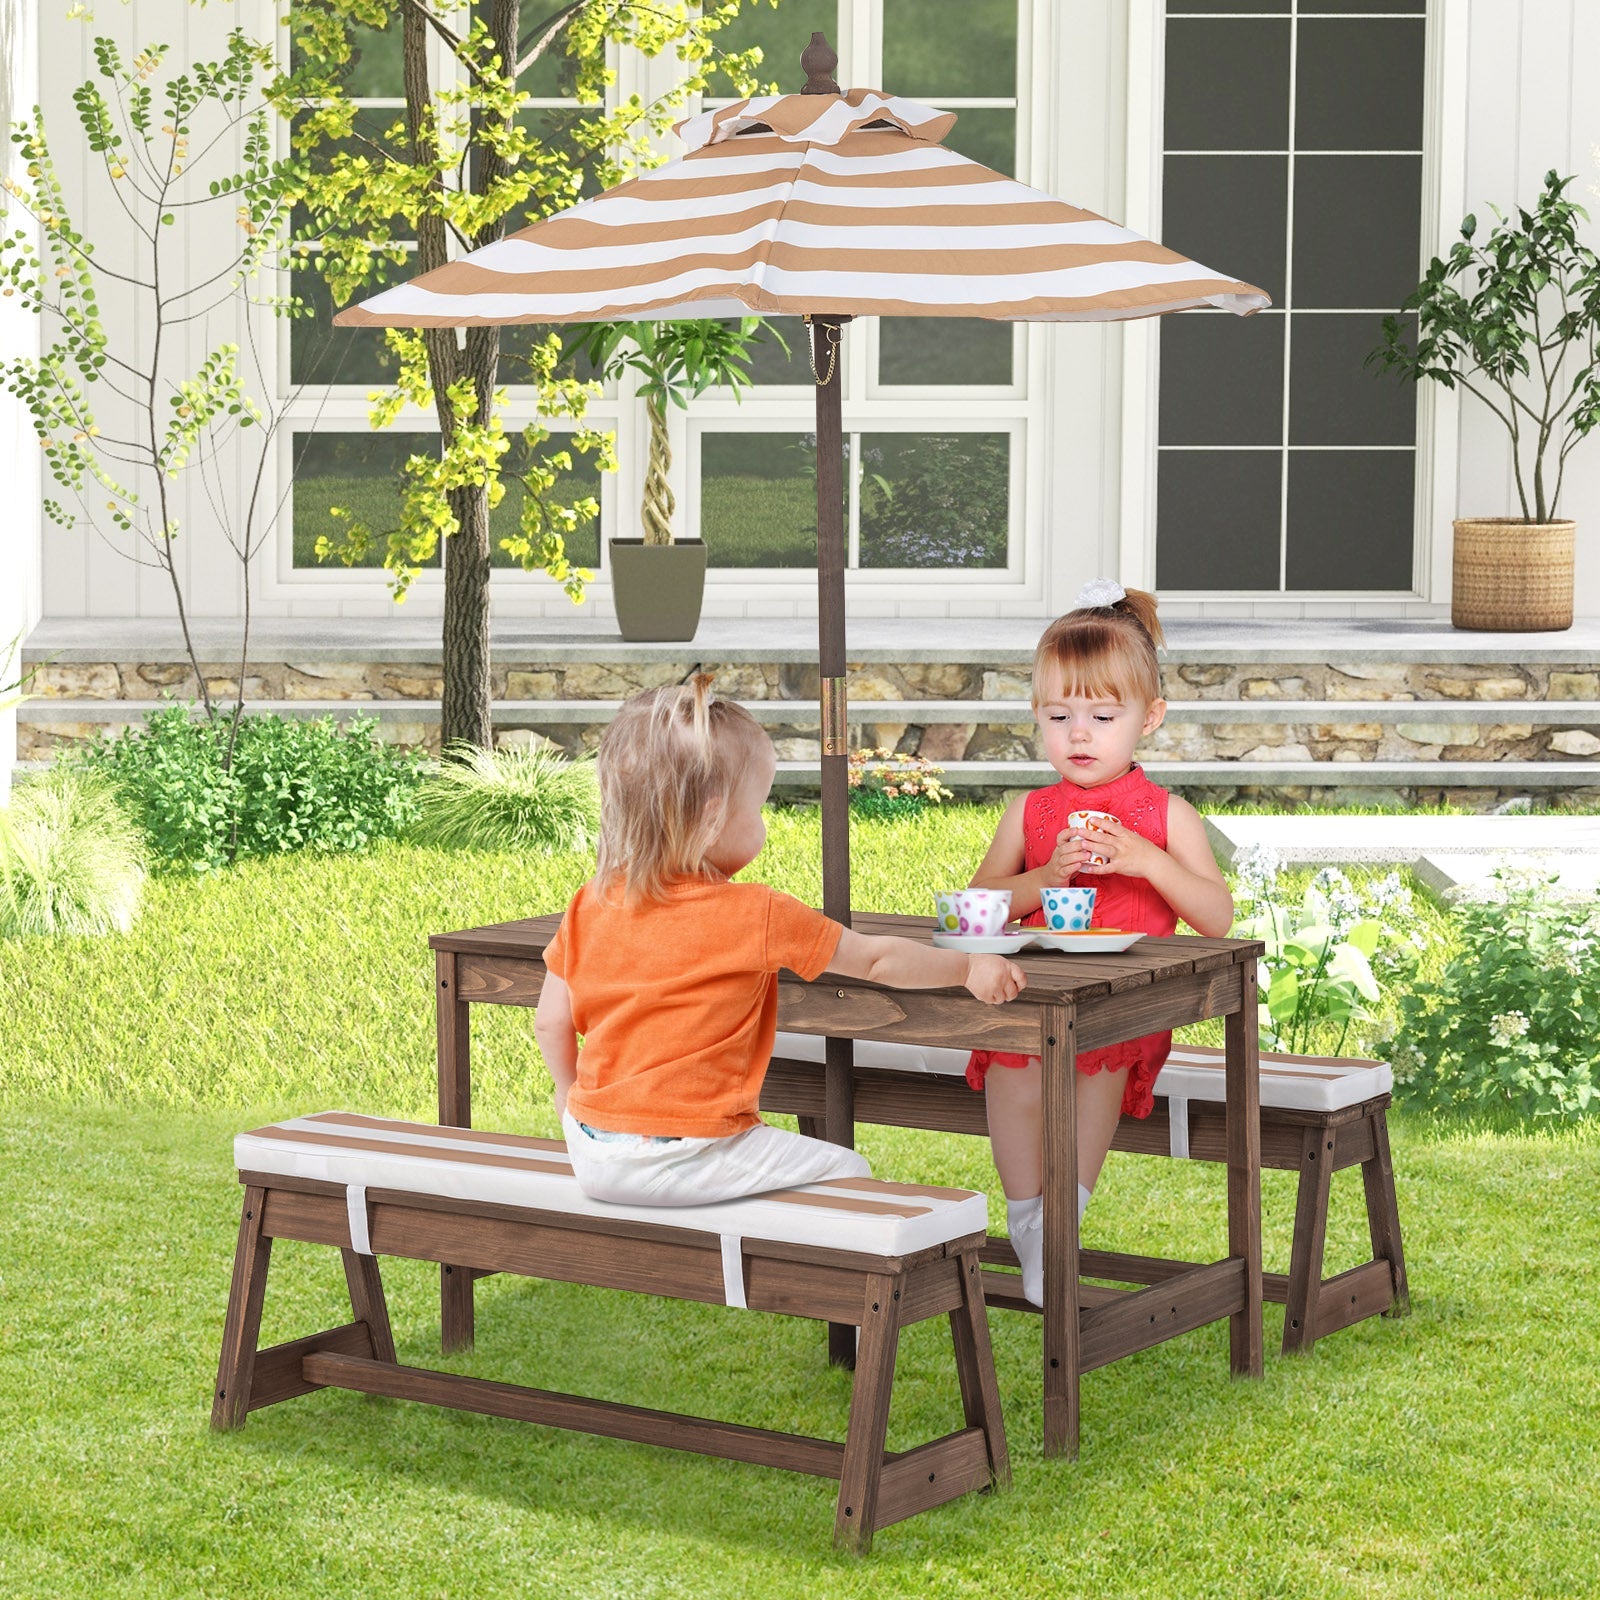 Children's Outdoor Activity Set: Table, Bench, Umbrella & Cushions - All-in-One Fun